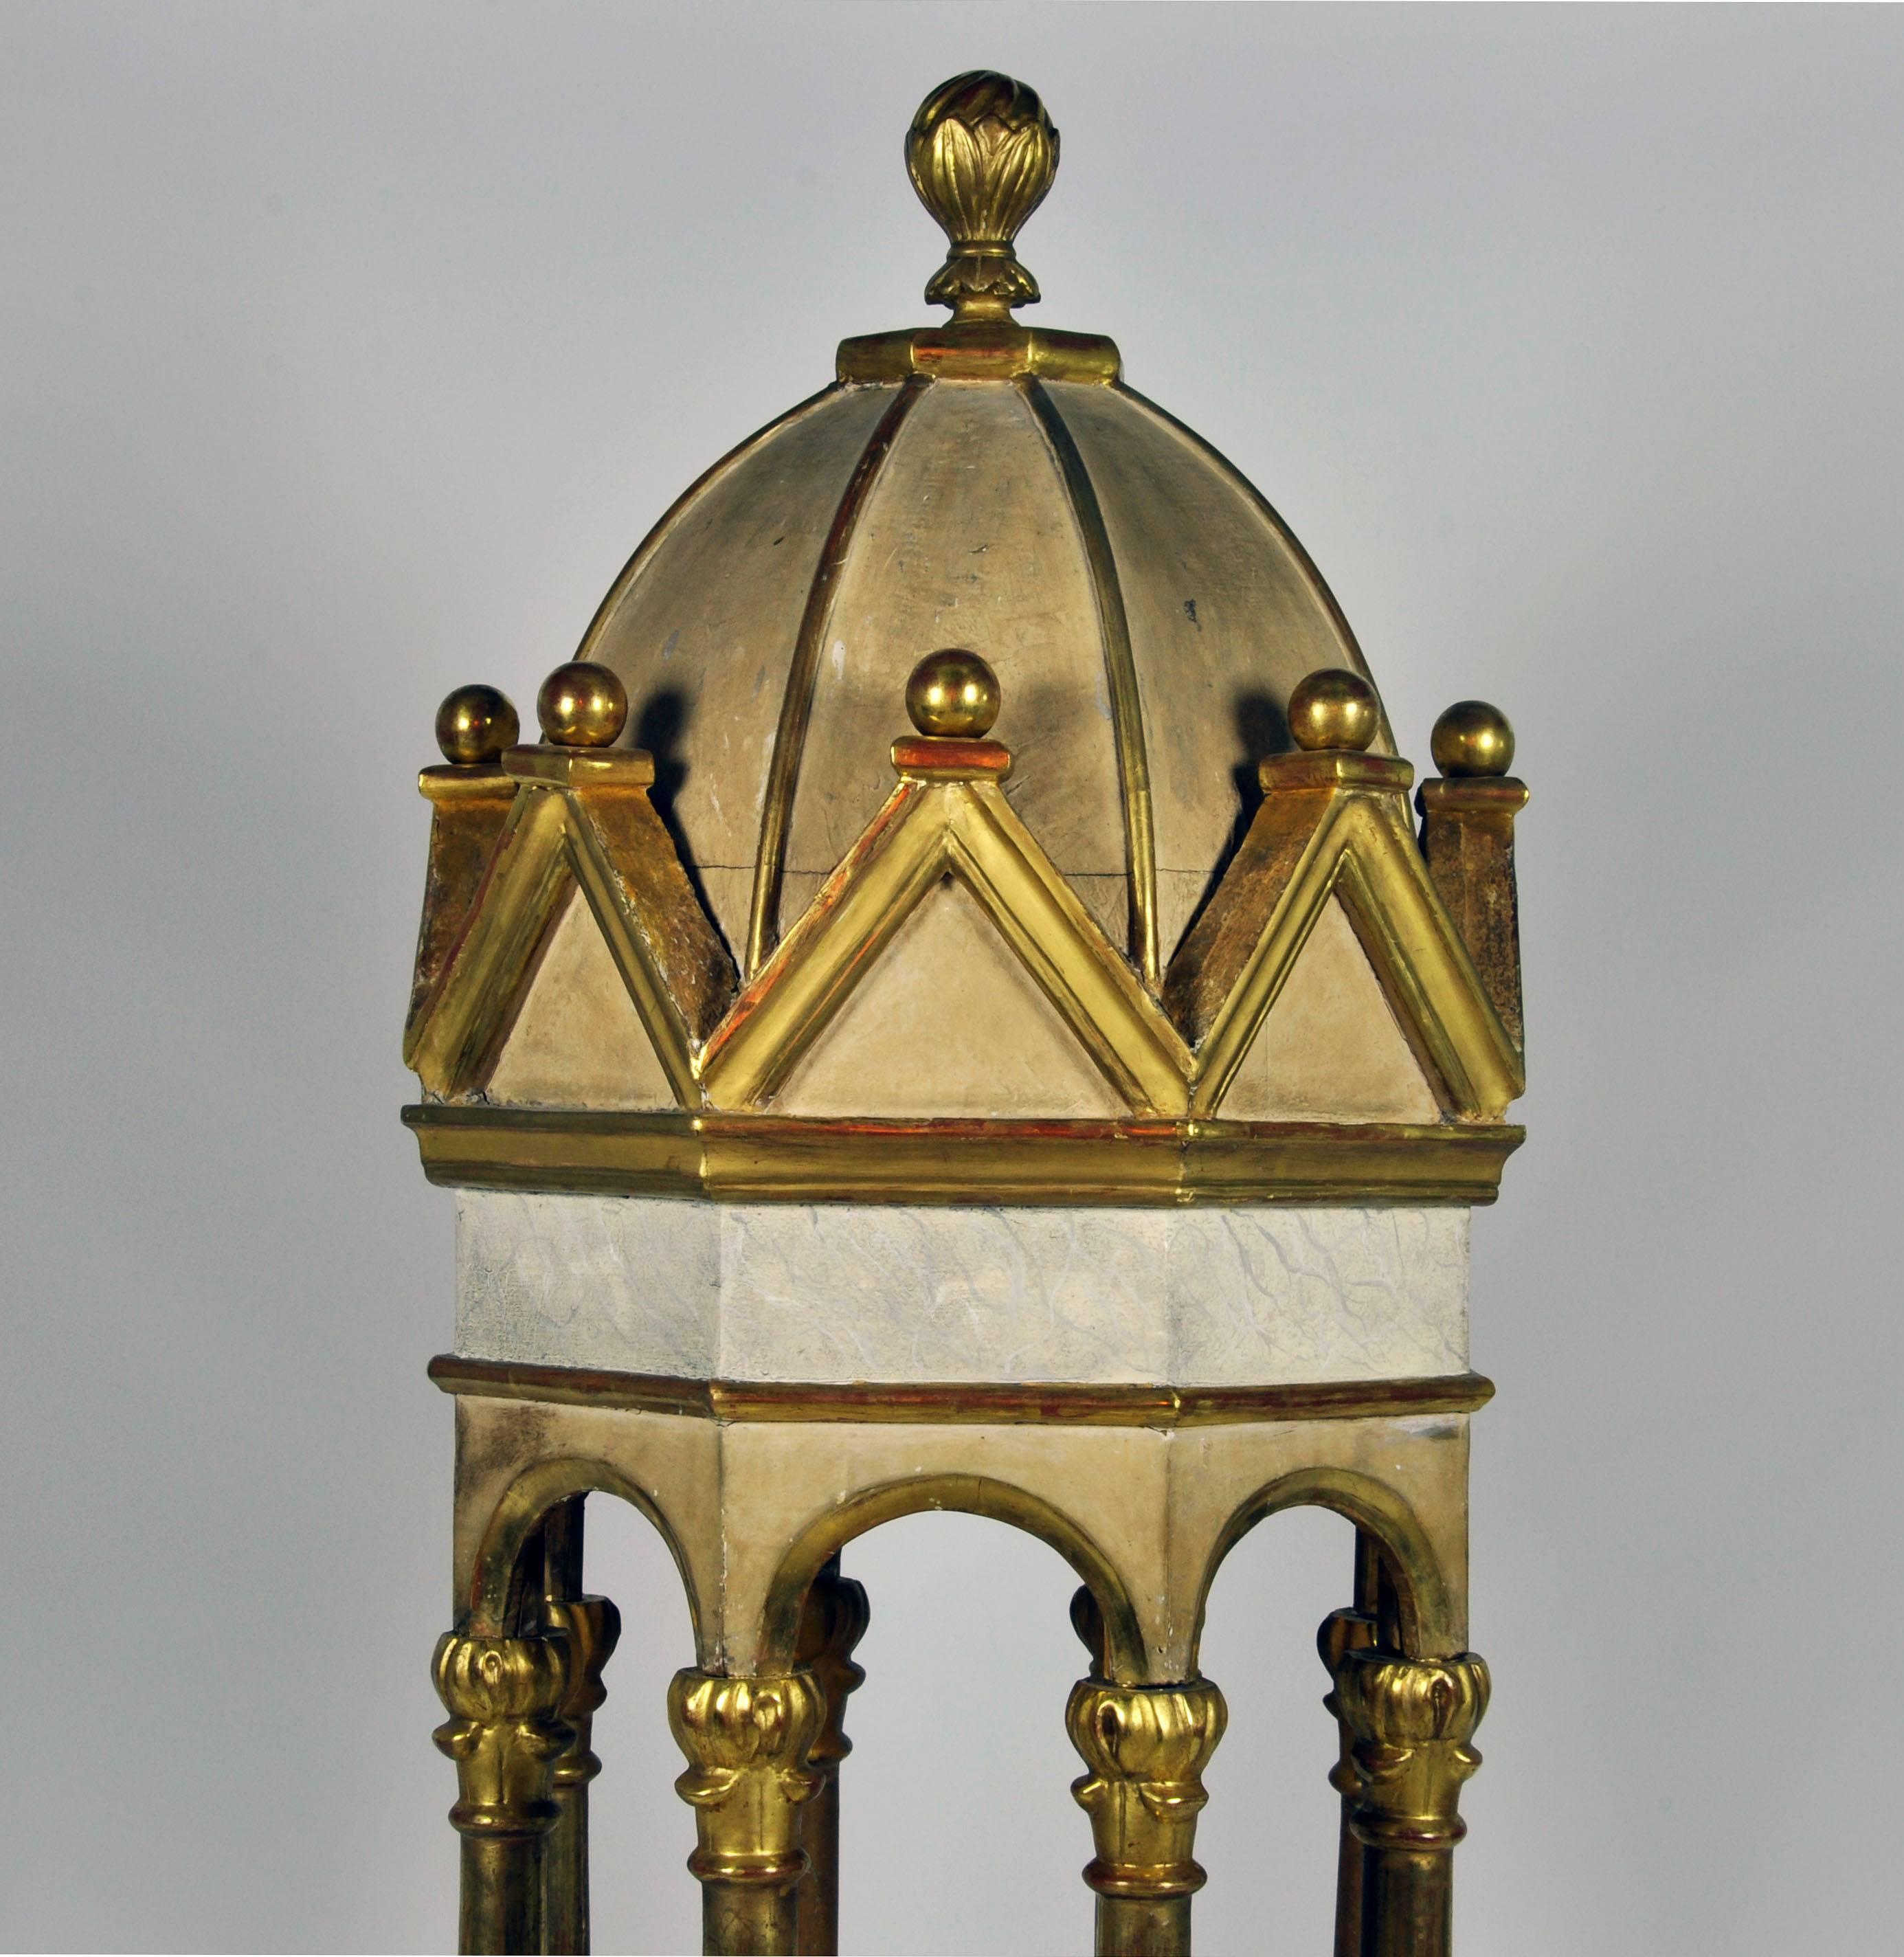 Gently restored to its former splendor this decorative paint and parcel giltwood pavilion model evokes notions of the rural churches of Northern Italy. The byzantine style gilt columns stand on a marble painted base under a likewise marble painted